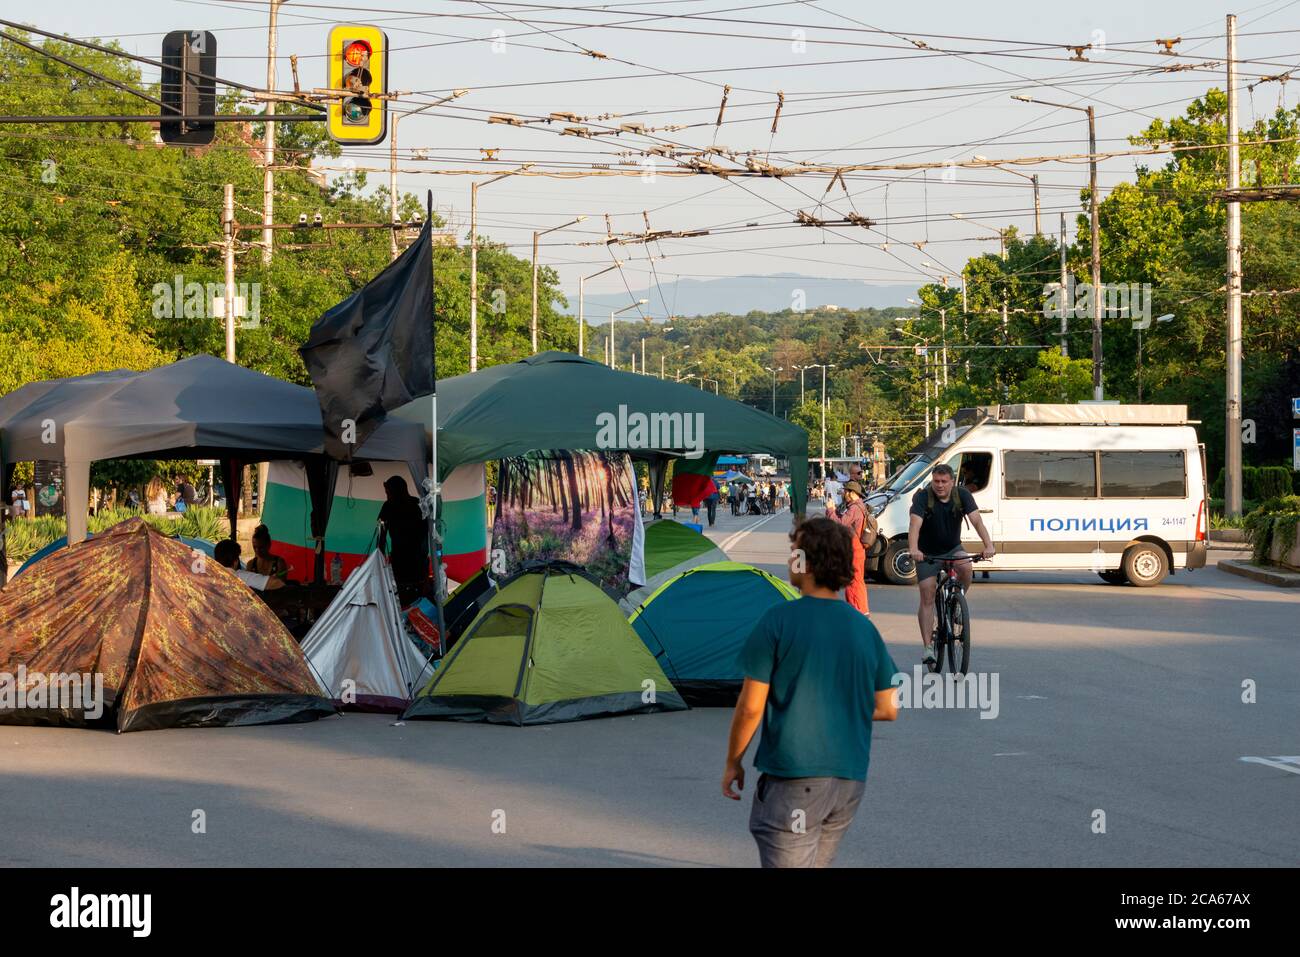 Sofia, Bulgaria. 3rd August 2020. Tents are seen at a major intersection in the streets of Sofia Bulgaria as the anti-Government peaceful protests against corruption intensify across the country for the last 26 days with some major streets and intersections around the parliament building blocked by tents and barricades and the capital city centre is totally closed for transport. Credit: Ognyan Yosifov / Alamy News Stock Photo